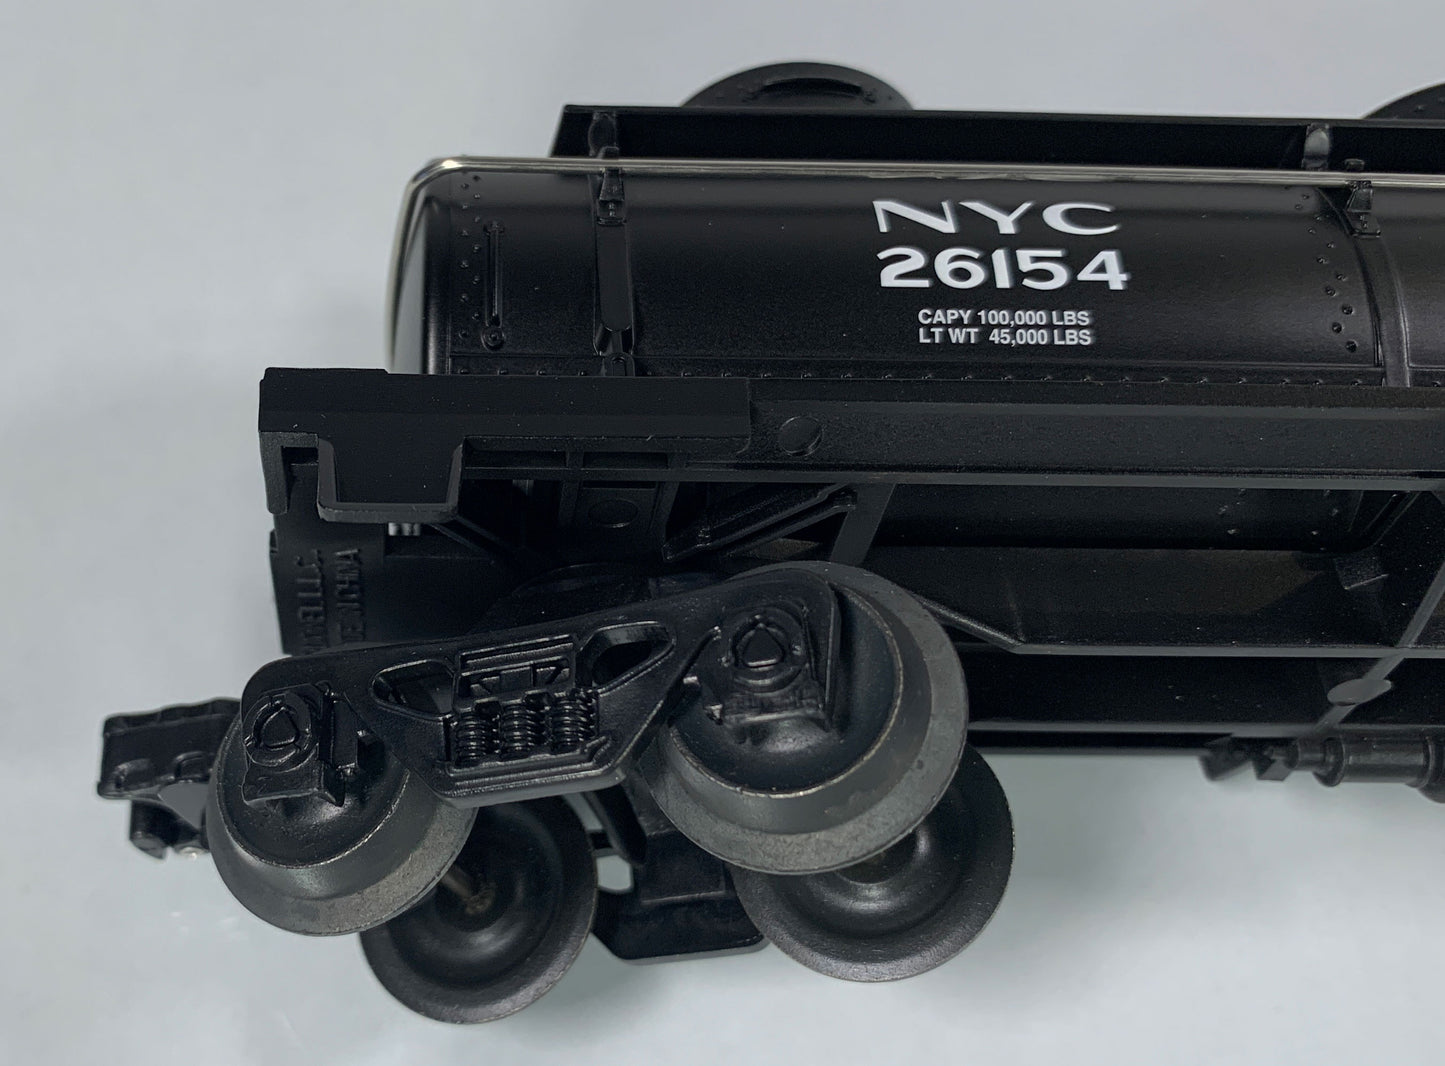 LIONEL • O GAUGE • 2003 New York Central Three Dome Tank Car 6-26154 • NEW OLD STOCK